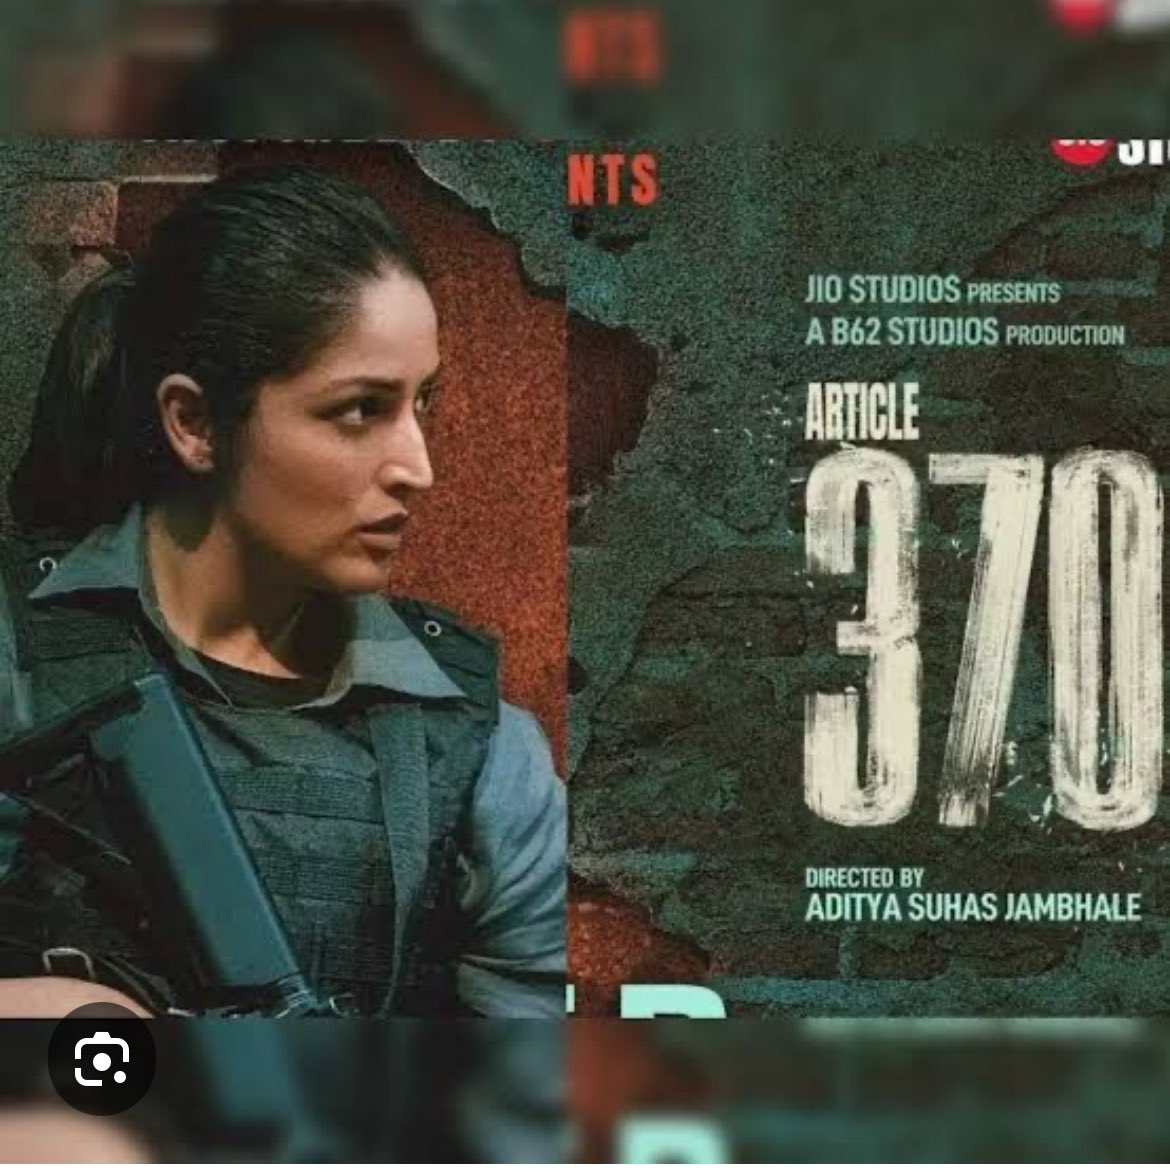 #Article370 #Netflix Gripping storyline. Polished production. #AdityaSuhasJambhale Great job @yamigautam and cast! What makes films like this so important and special is the conversations they spark off after, enriching understanding of politics, history, culture AND an